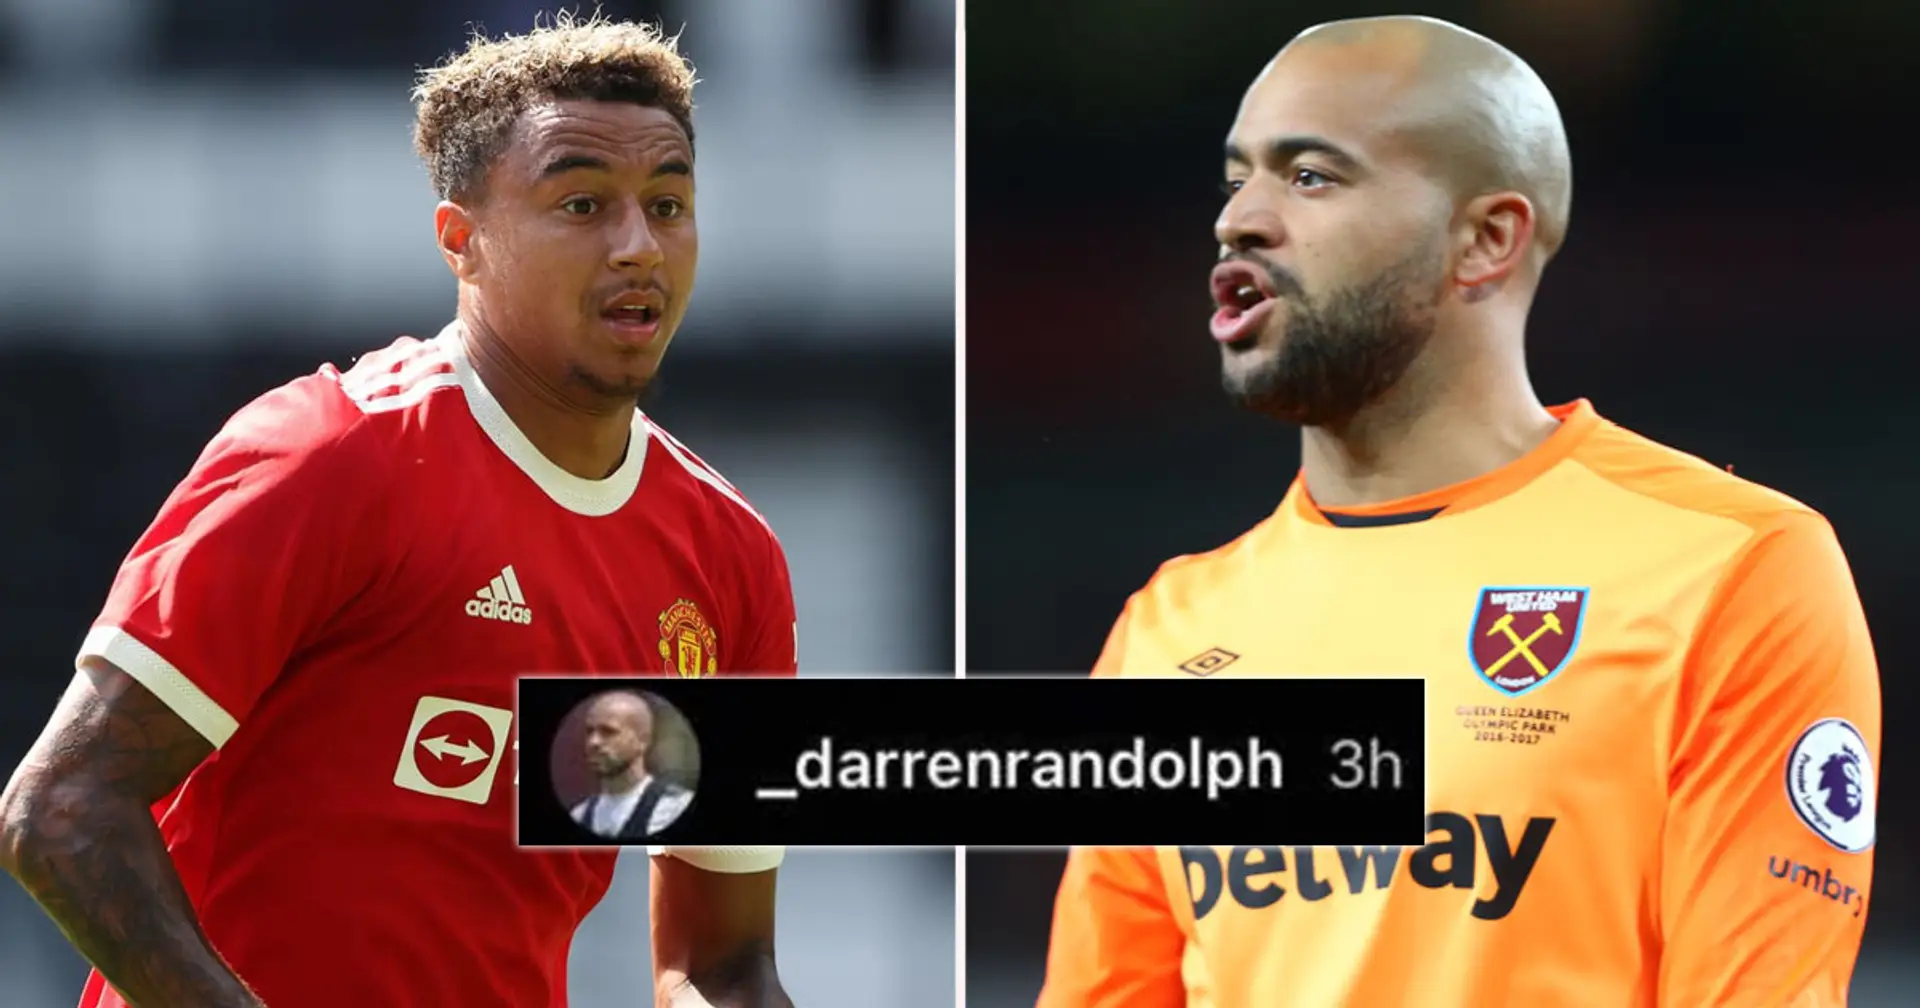 'You know what to do': West Ham keeper Randolph sends inviting message to Lingard